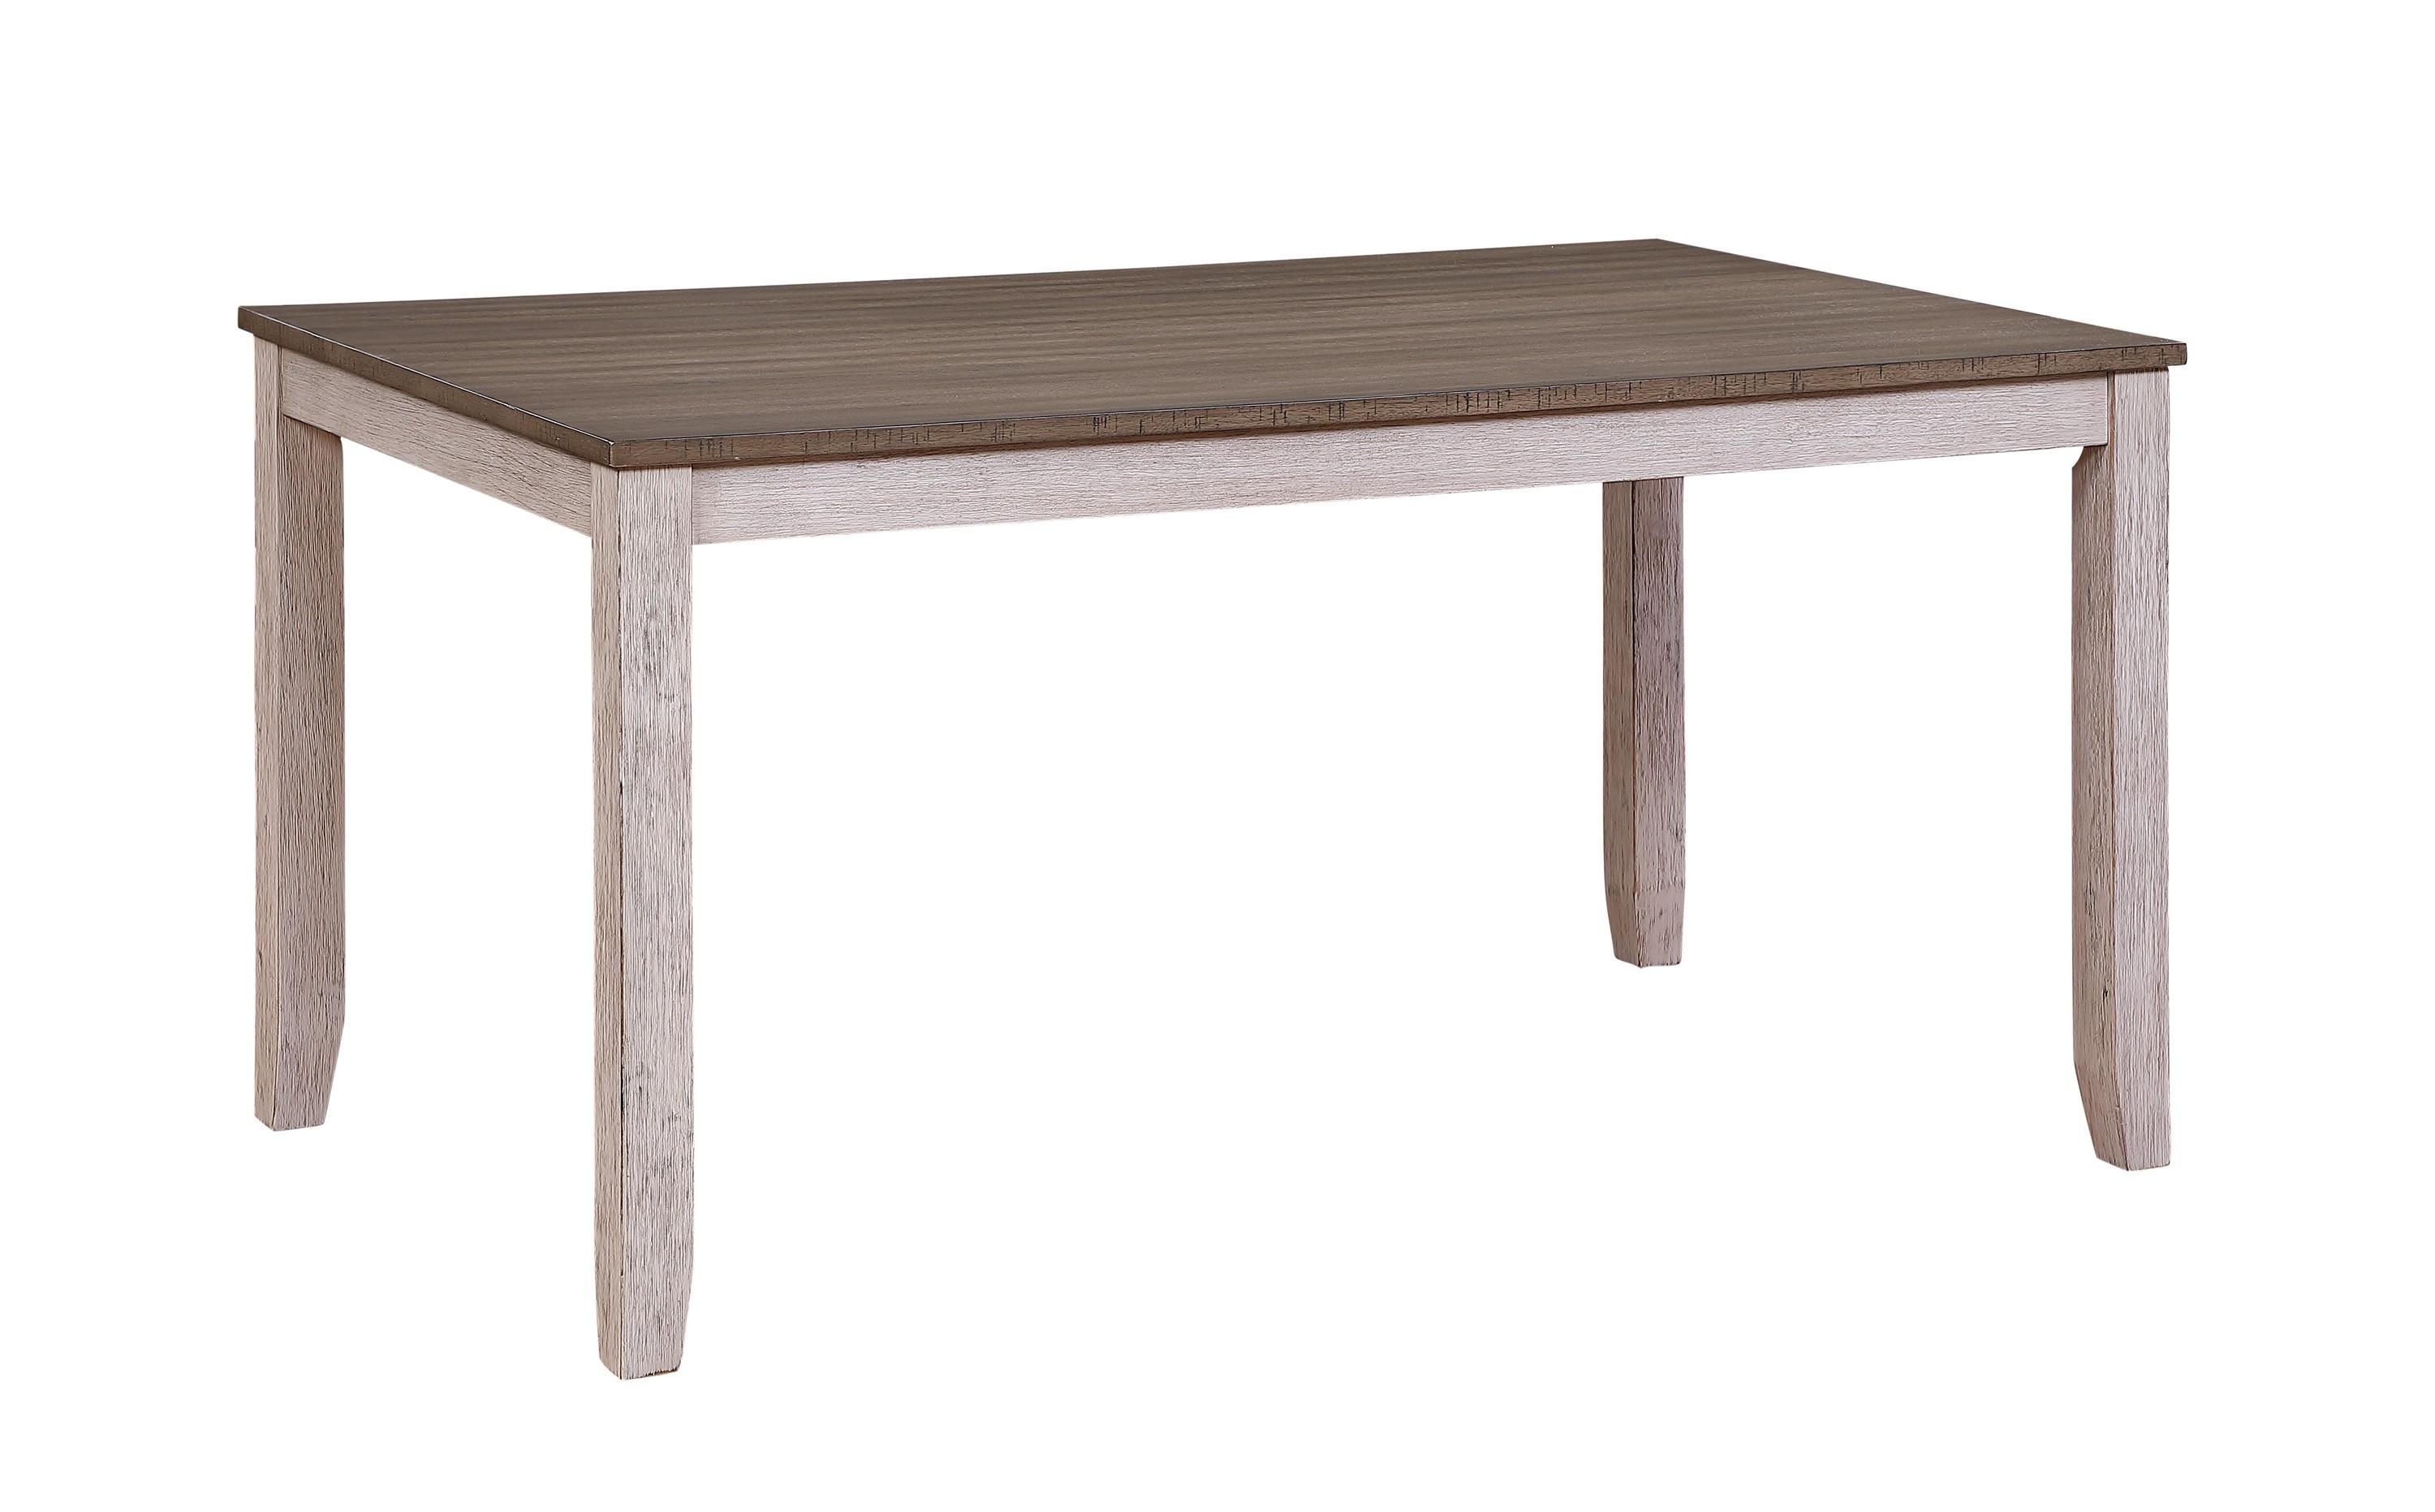 Transitional Dining Table 5769W-60 Ithaca 5769W-60 in White, Brown 